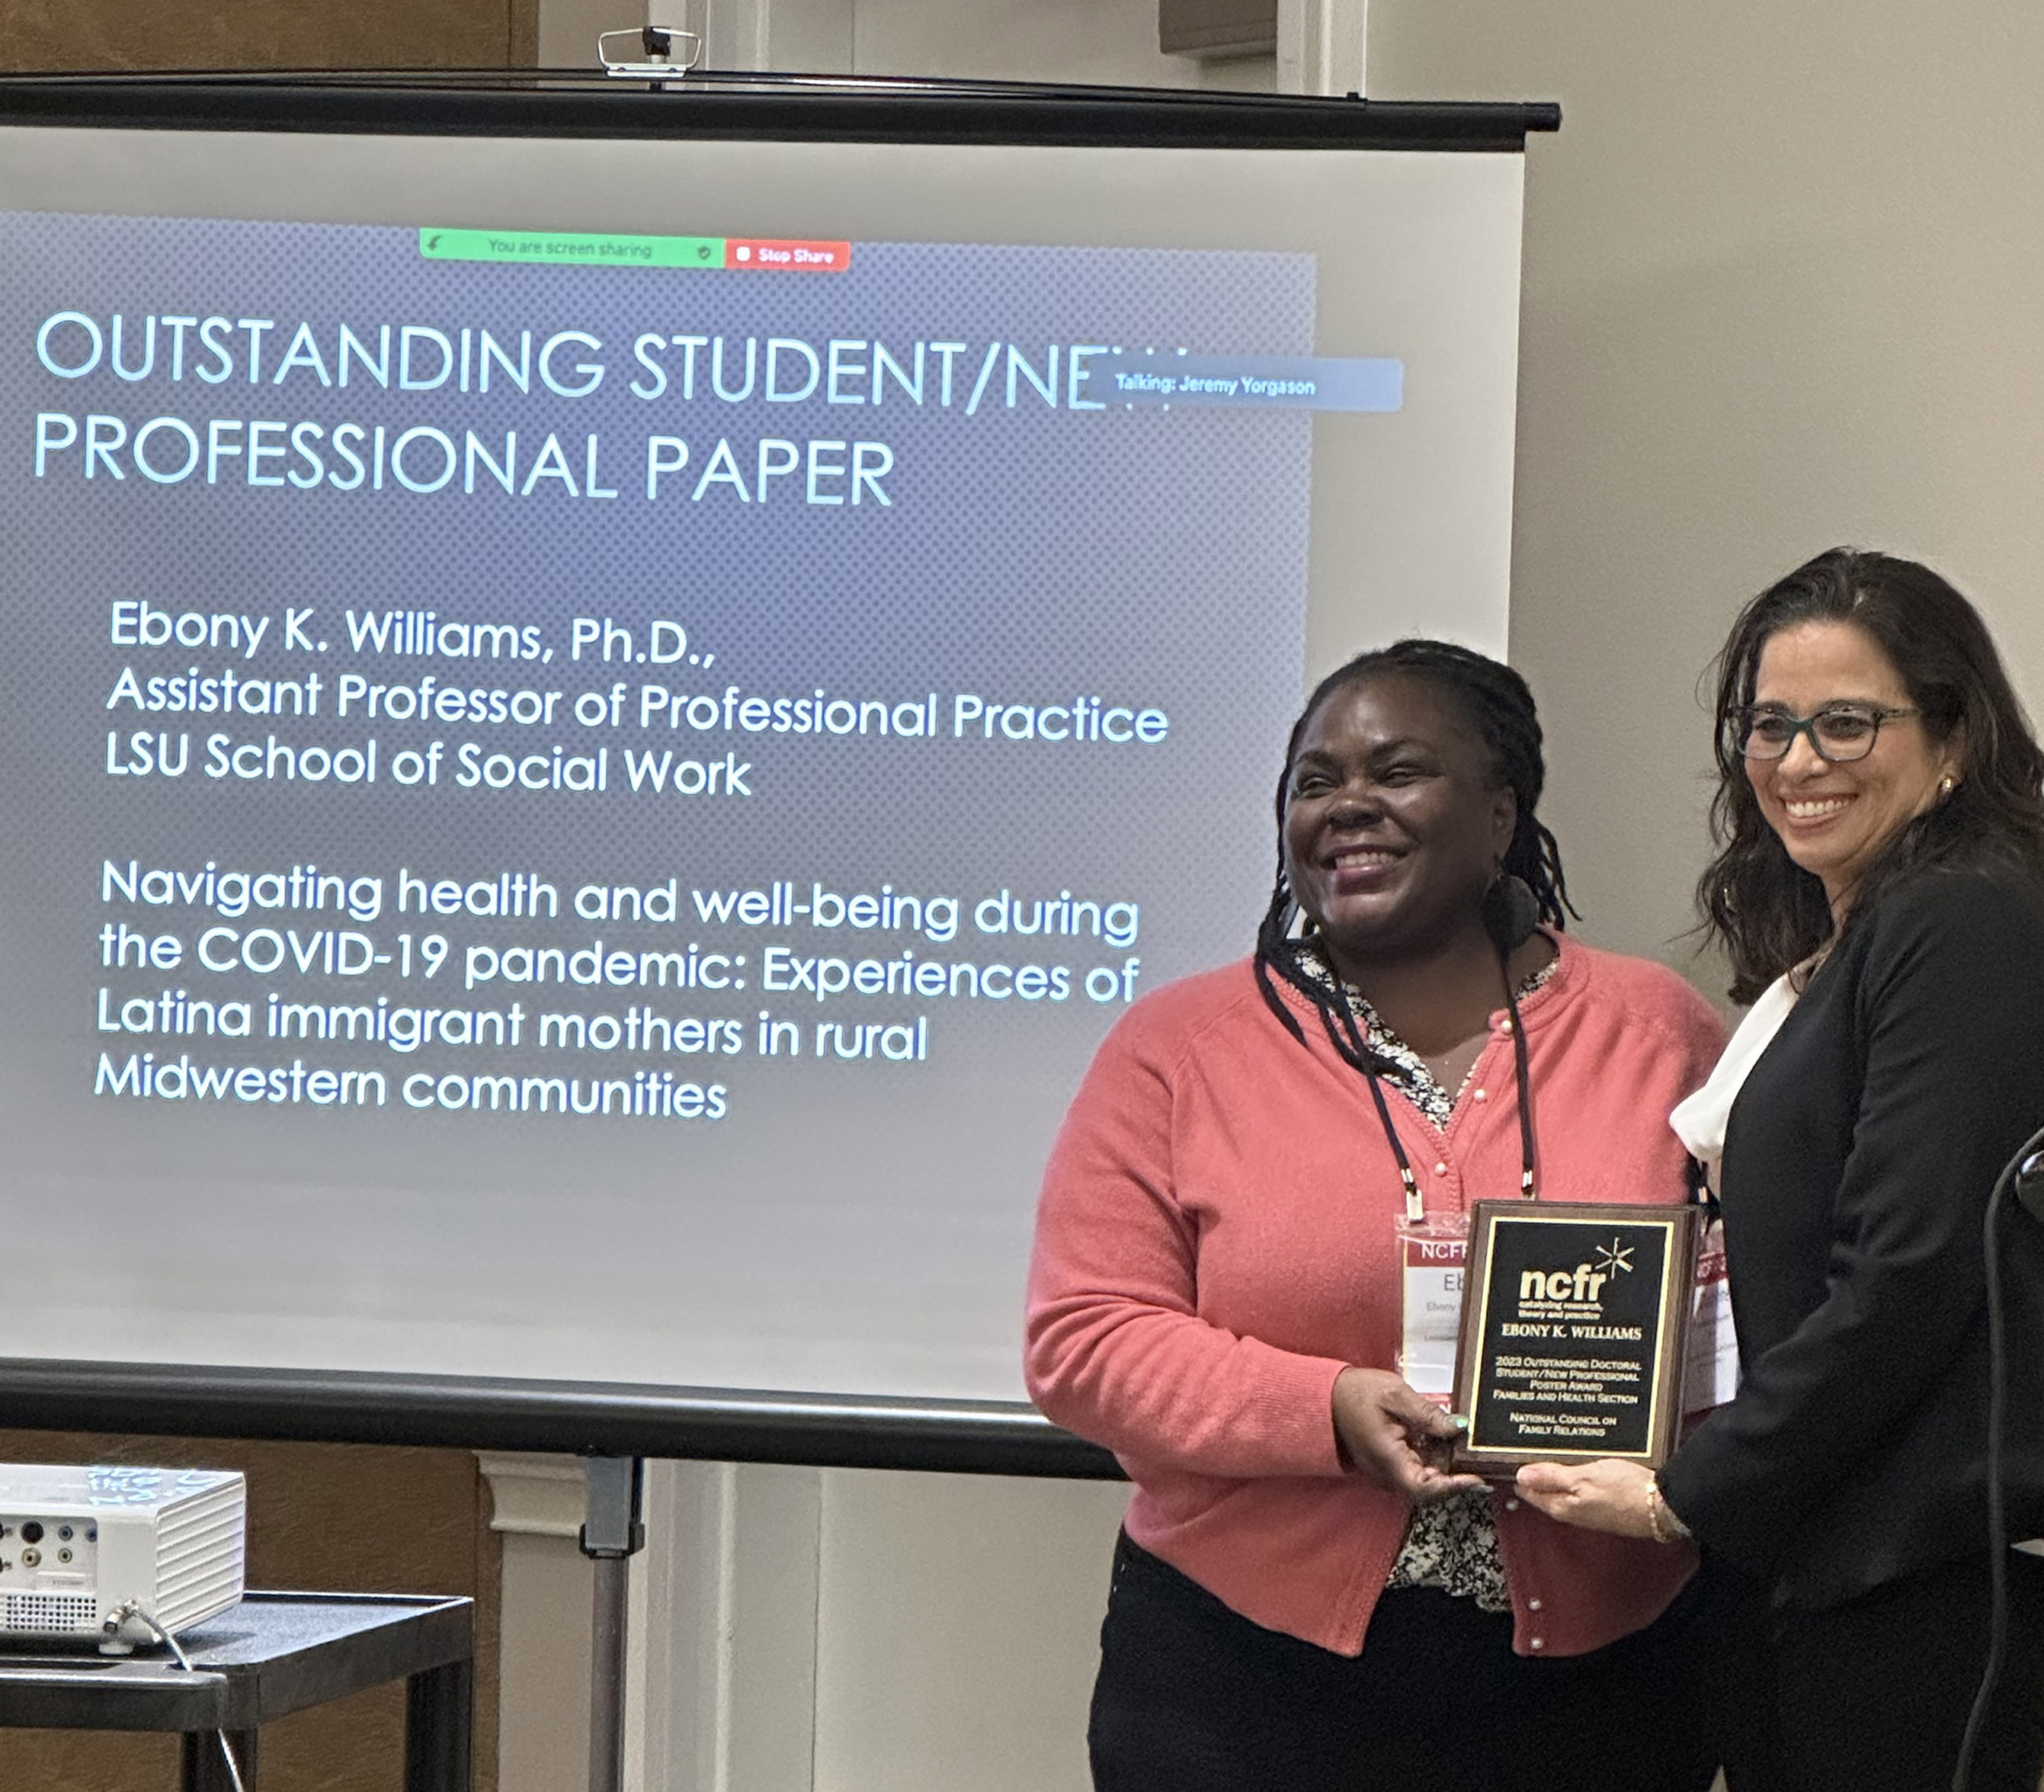 Dr. Ebony Williams receives award plaque from Daphne Hernandez in front of a description of the award